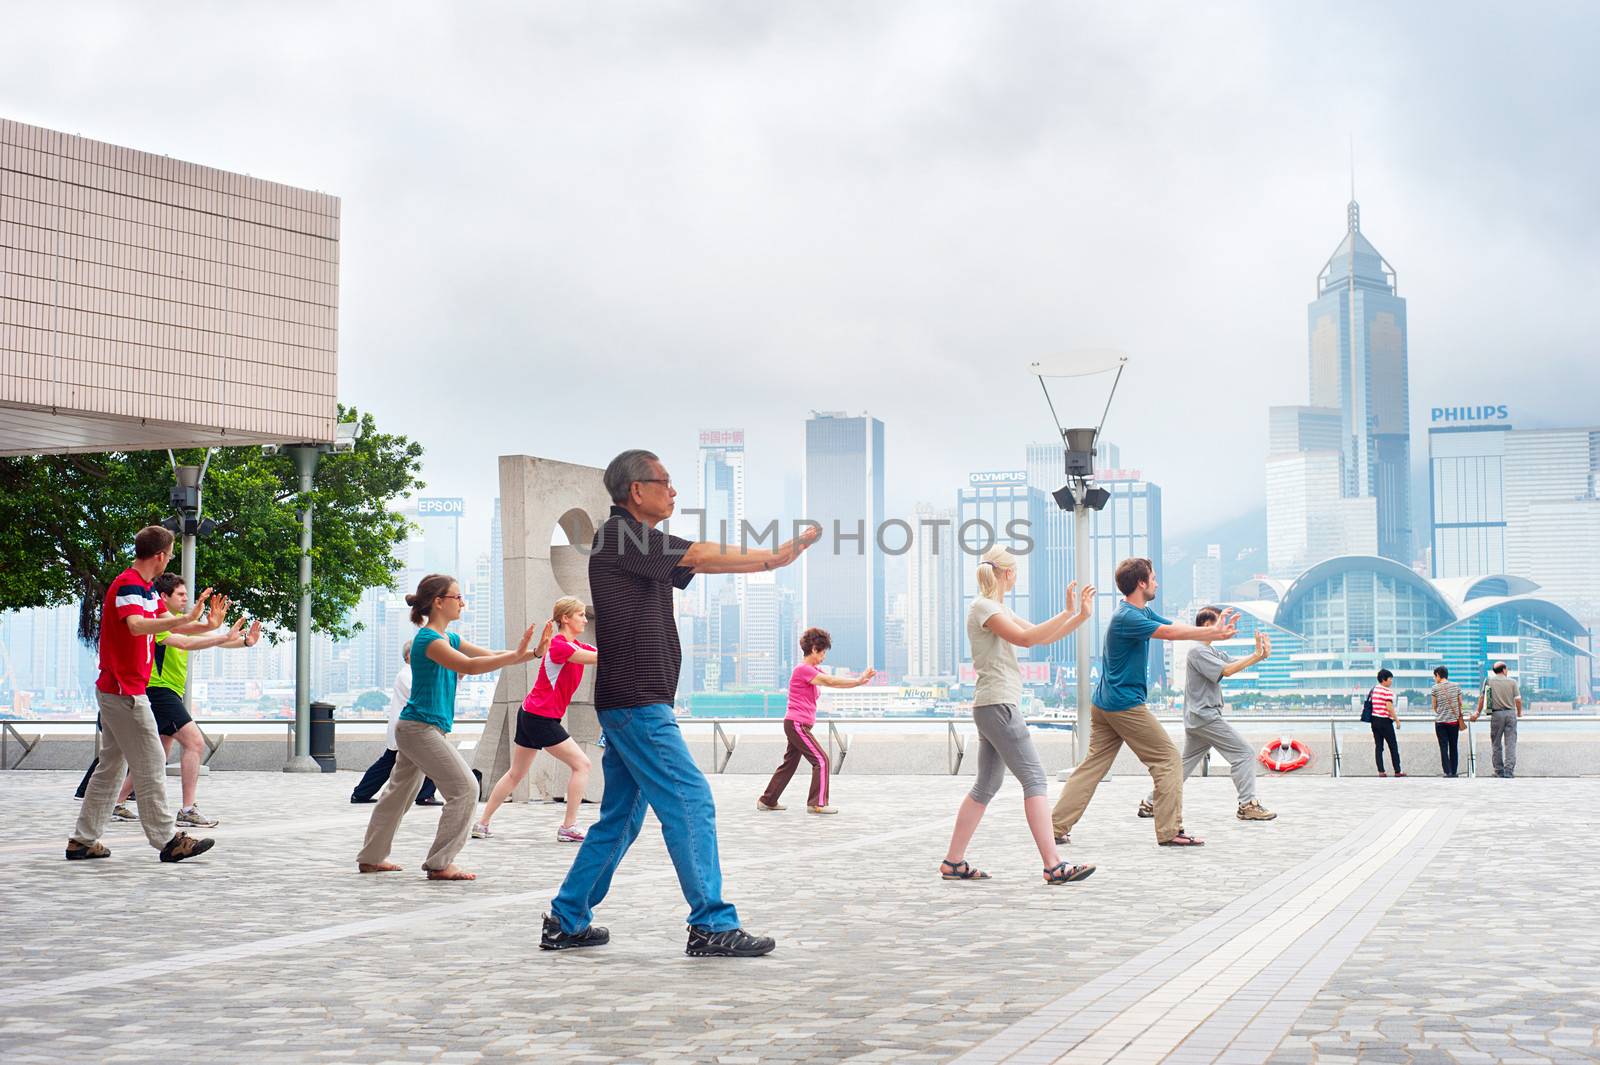 Hong Kong S.A.R. - May 15, 2013: Tai Chi Public Exercising in early morning  in Hong Kong. With a land of 1,104 km and population of 7 million, Hong Kong is one of the most densely populated areas in the world